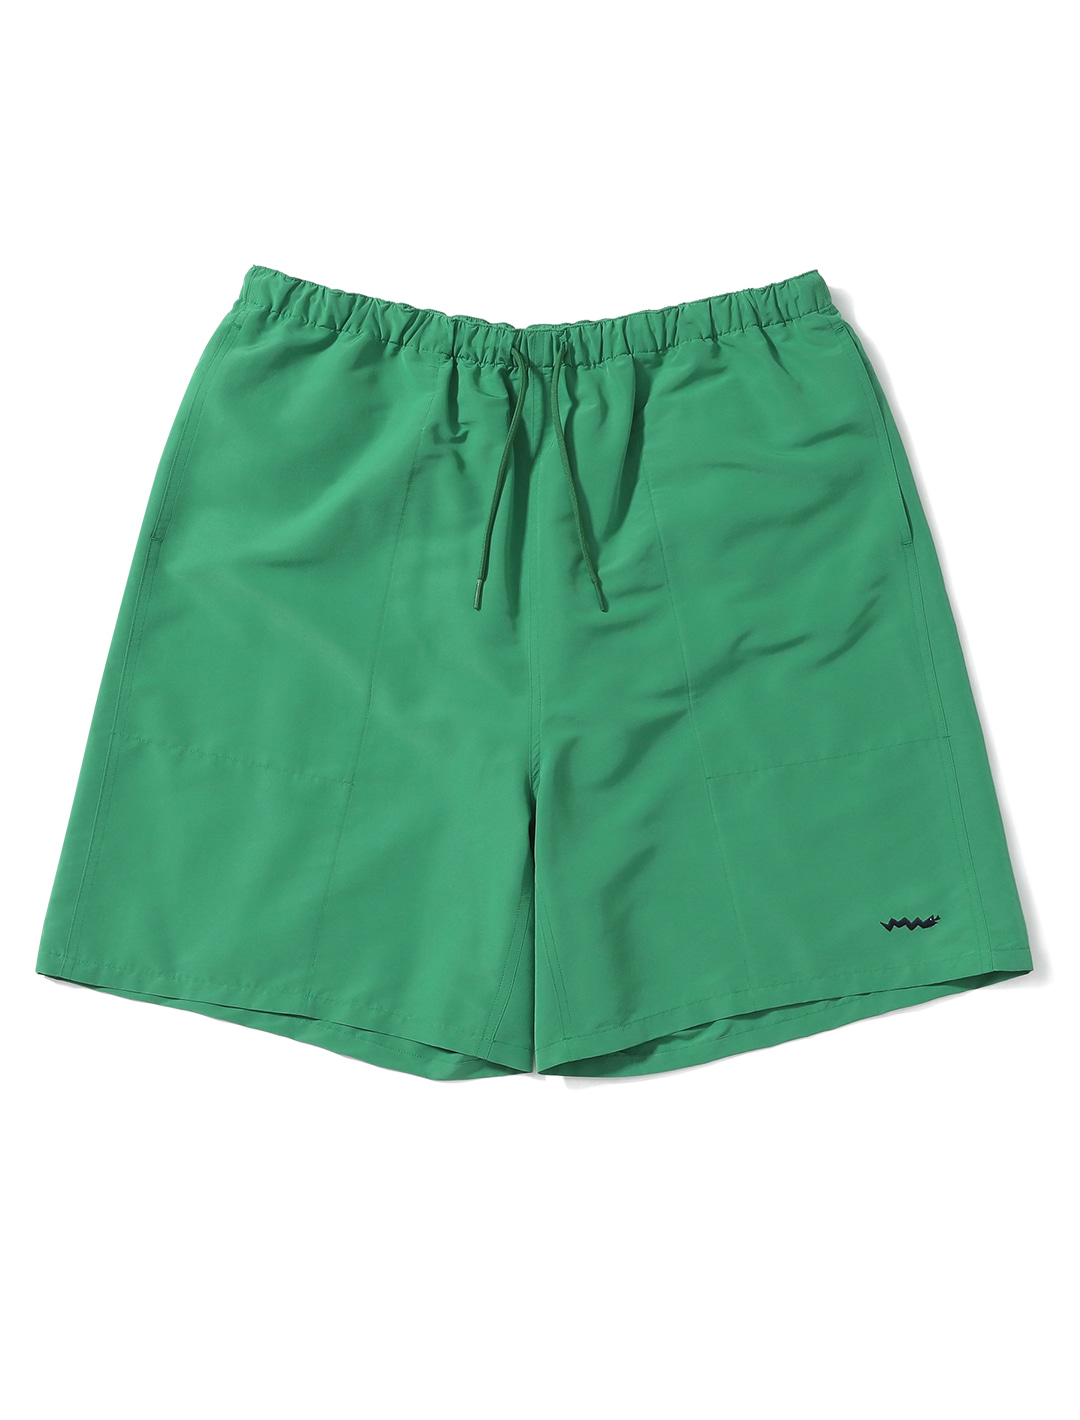 Suffer Shorts Teal